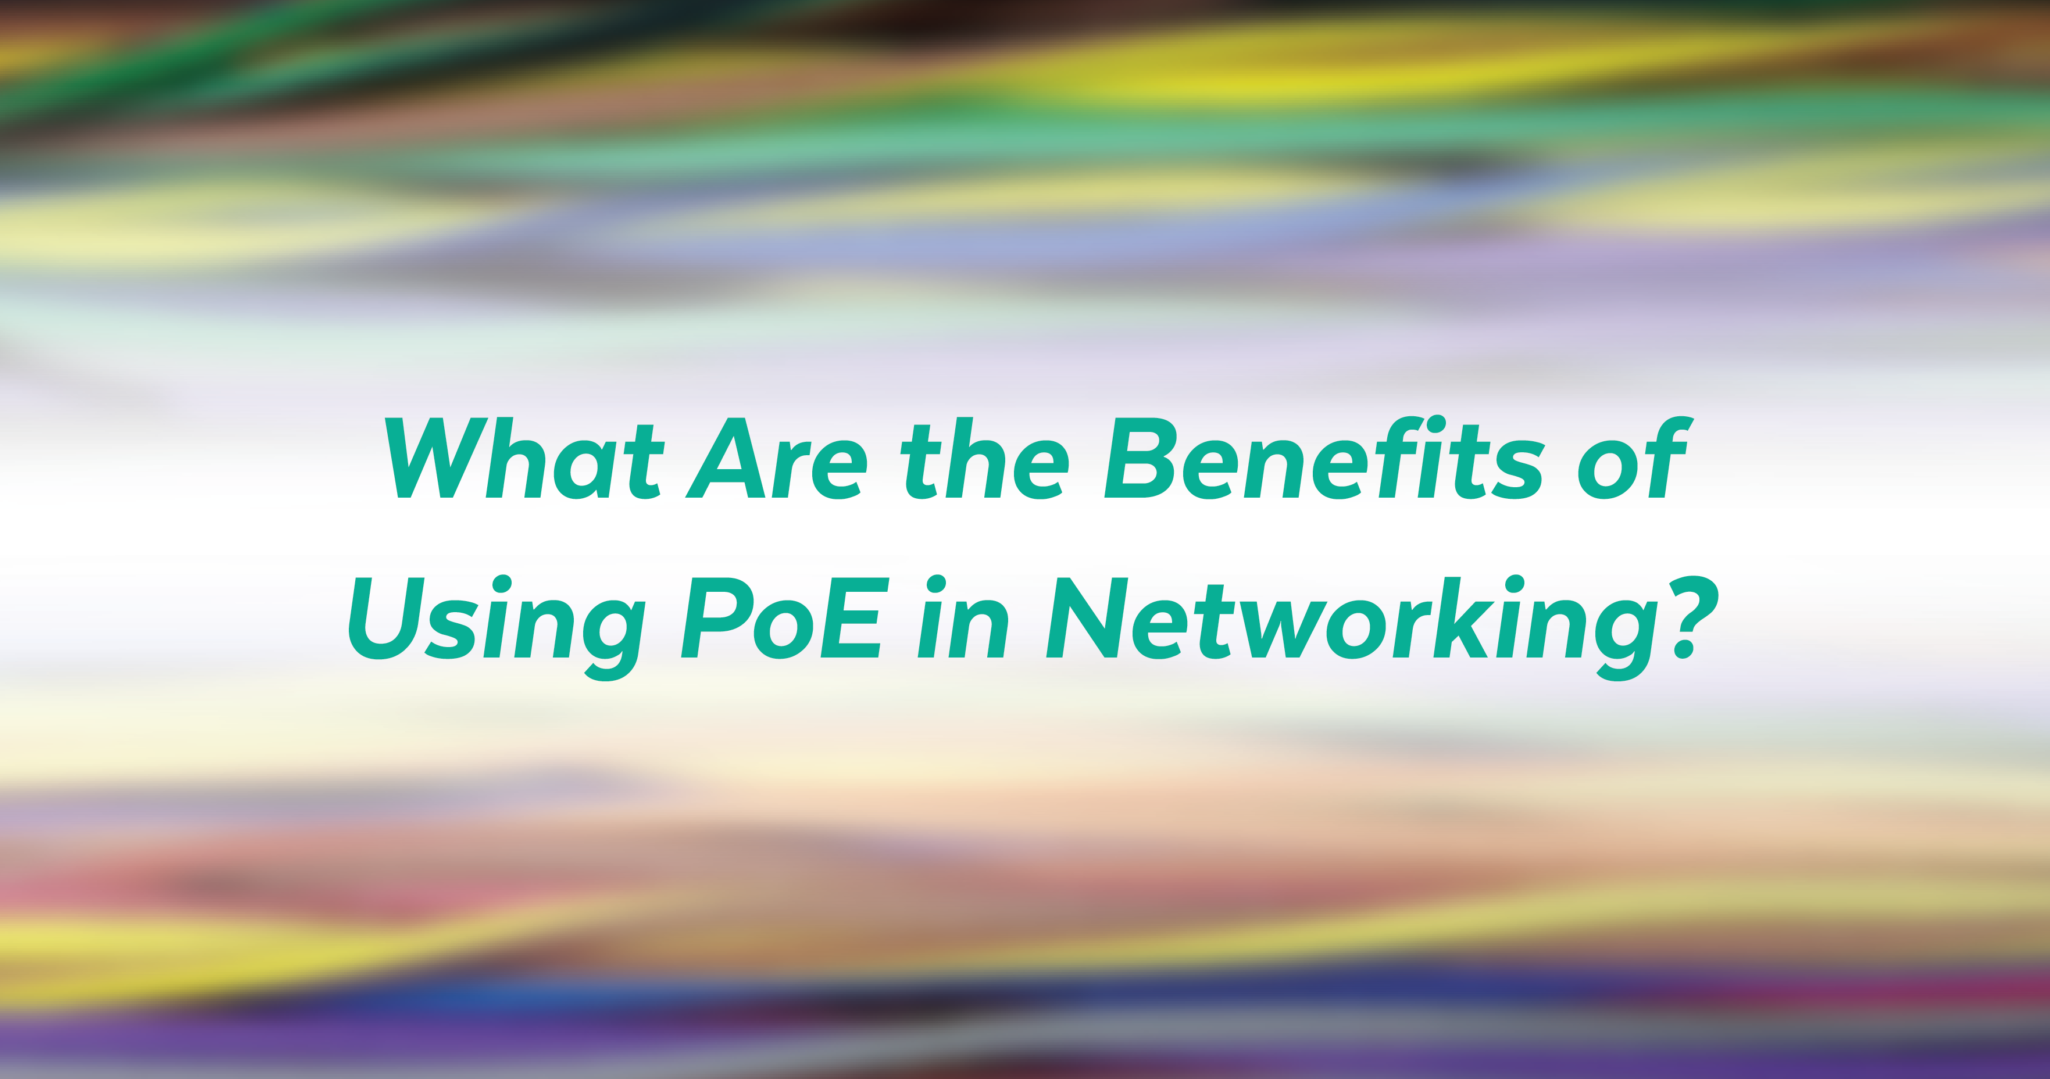 What Are the Benefits of Using PoE in Networking?